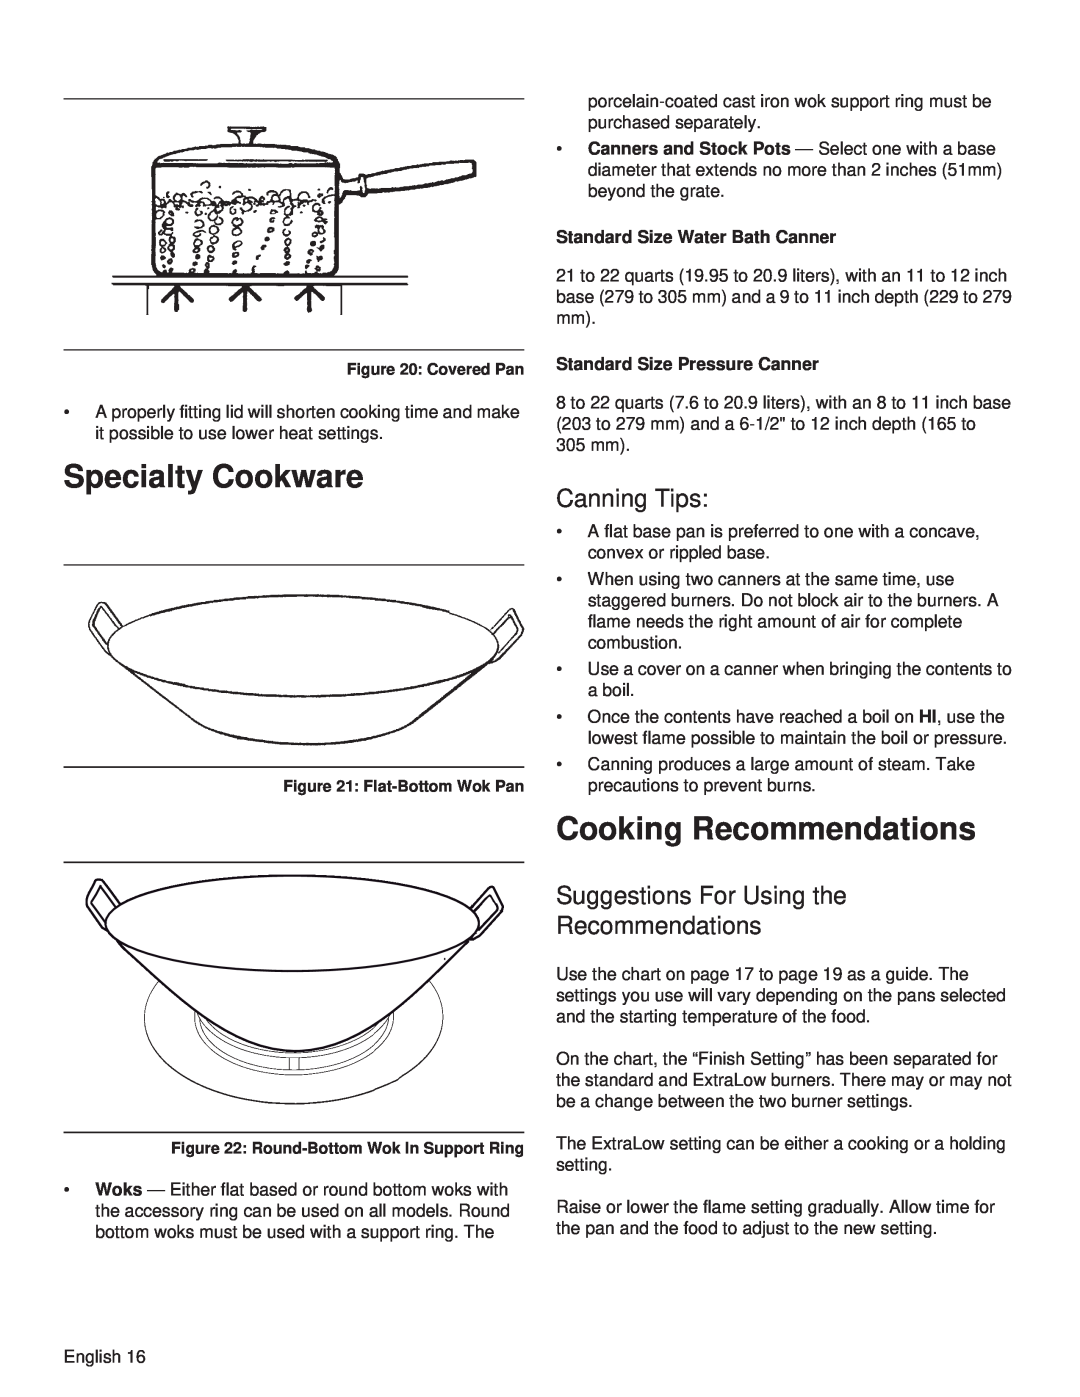 Thermador PRL36 manual Specialty Cookware, Cooking Recommendations, Canning Tips, Suggestions For Using the Recommendations 